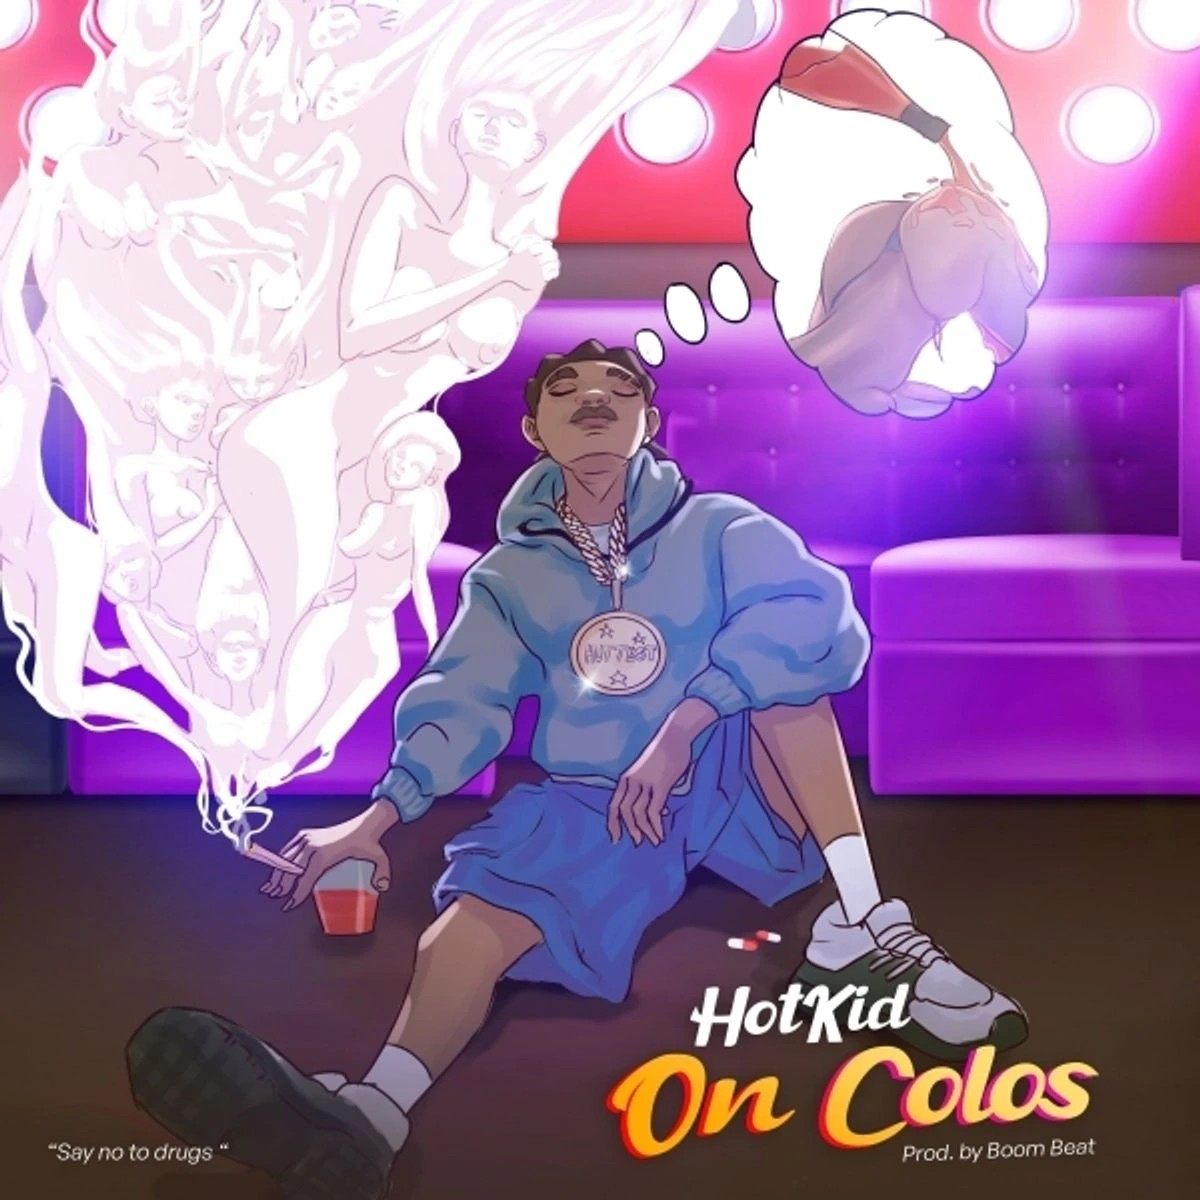 HotKid – On Colos mp3 download